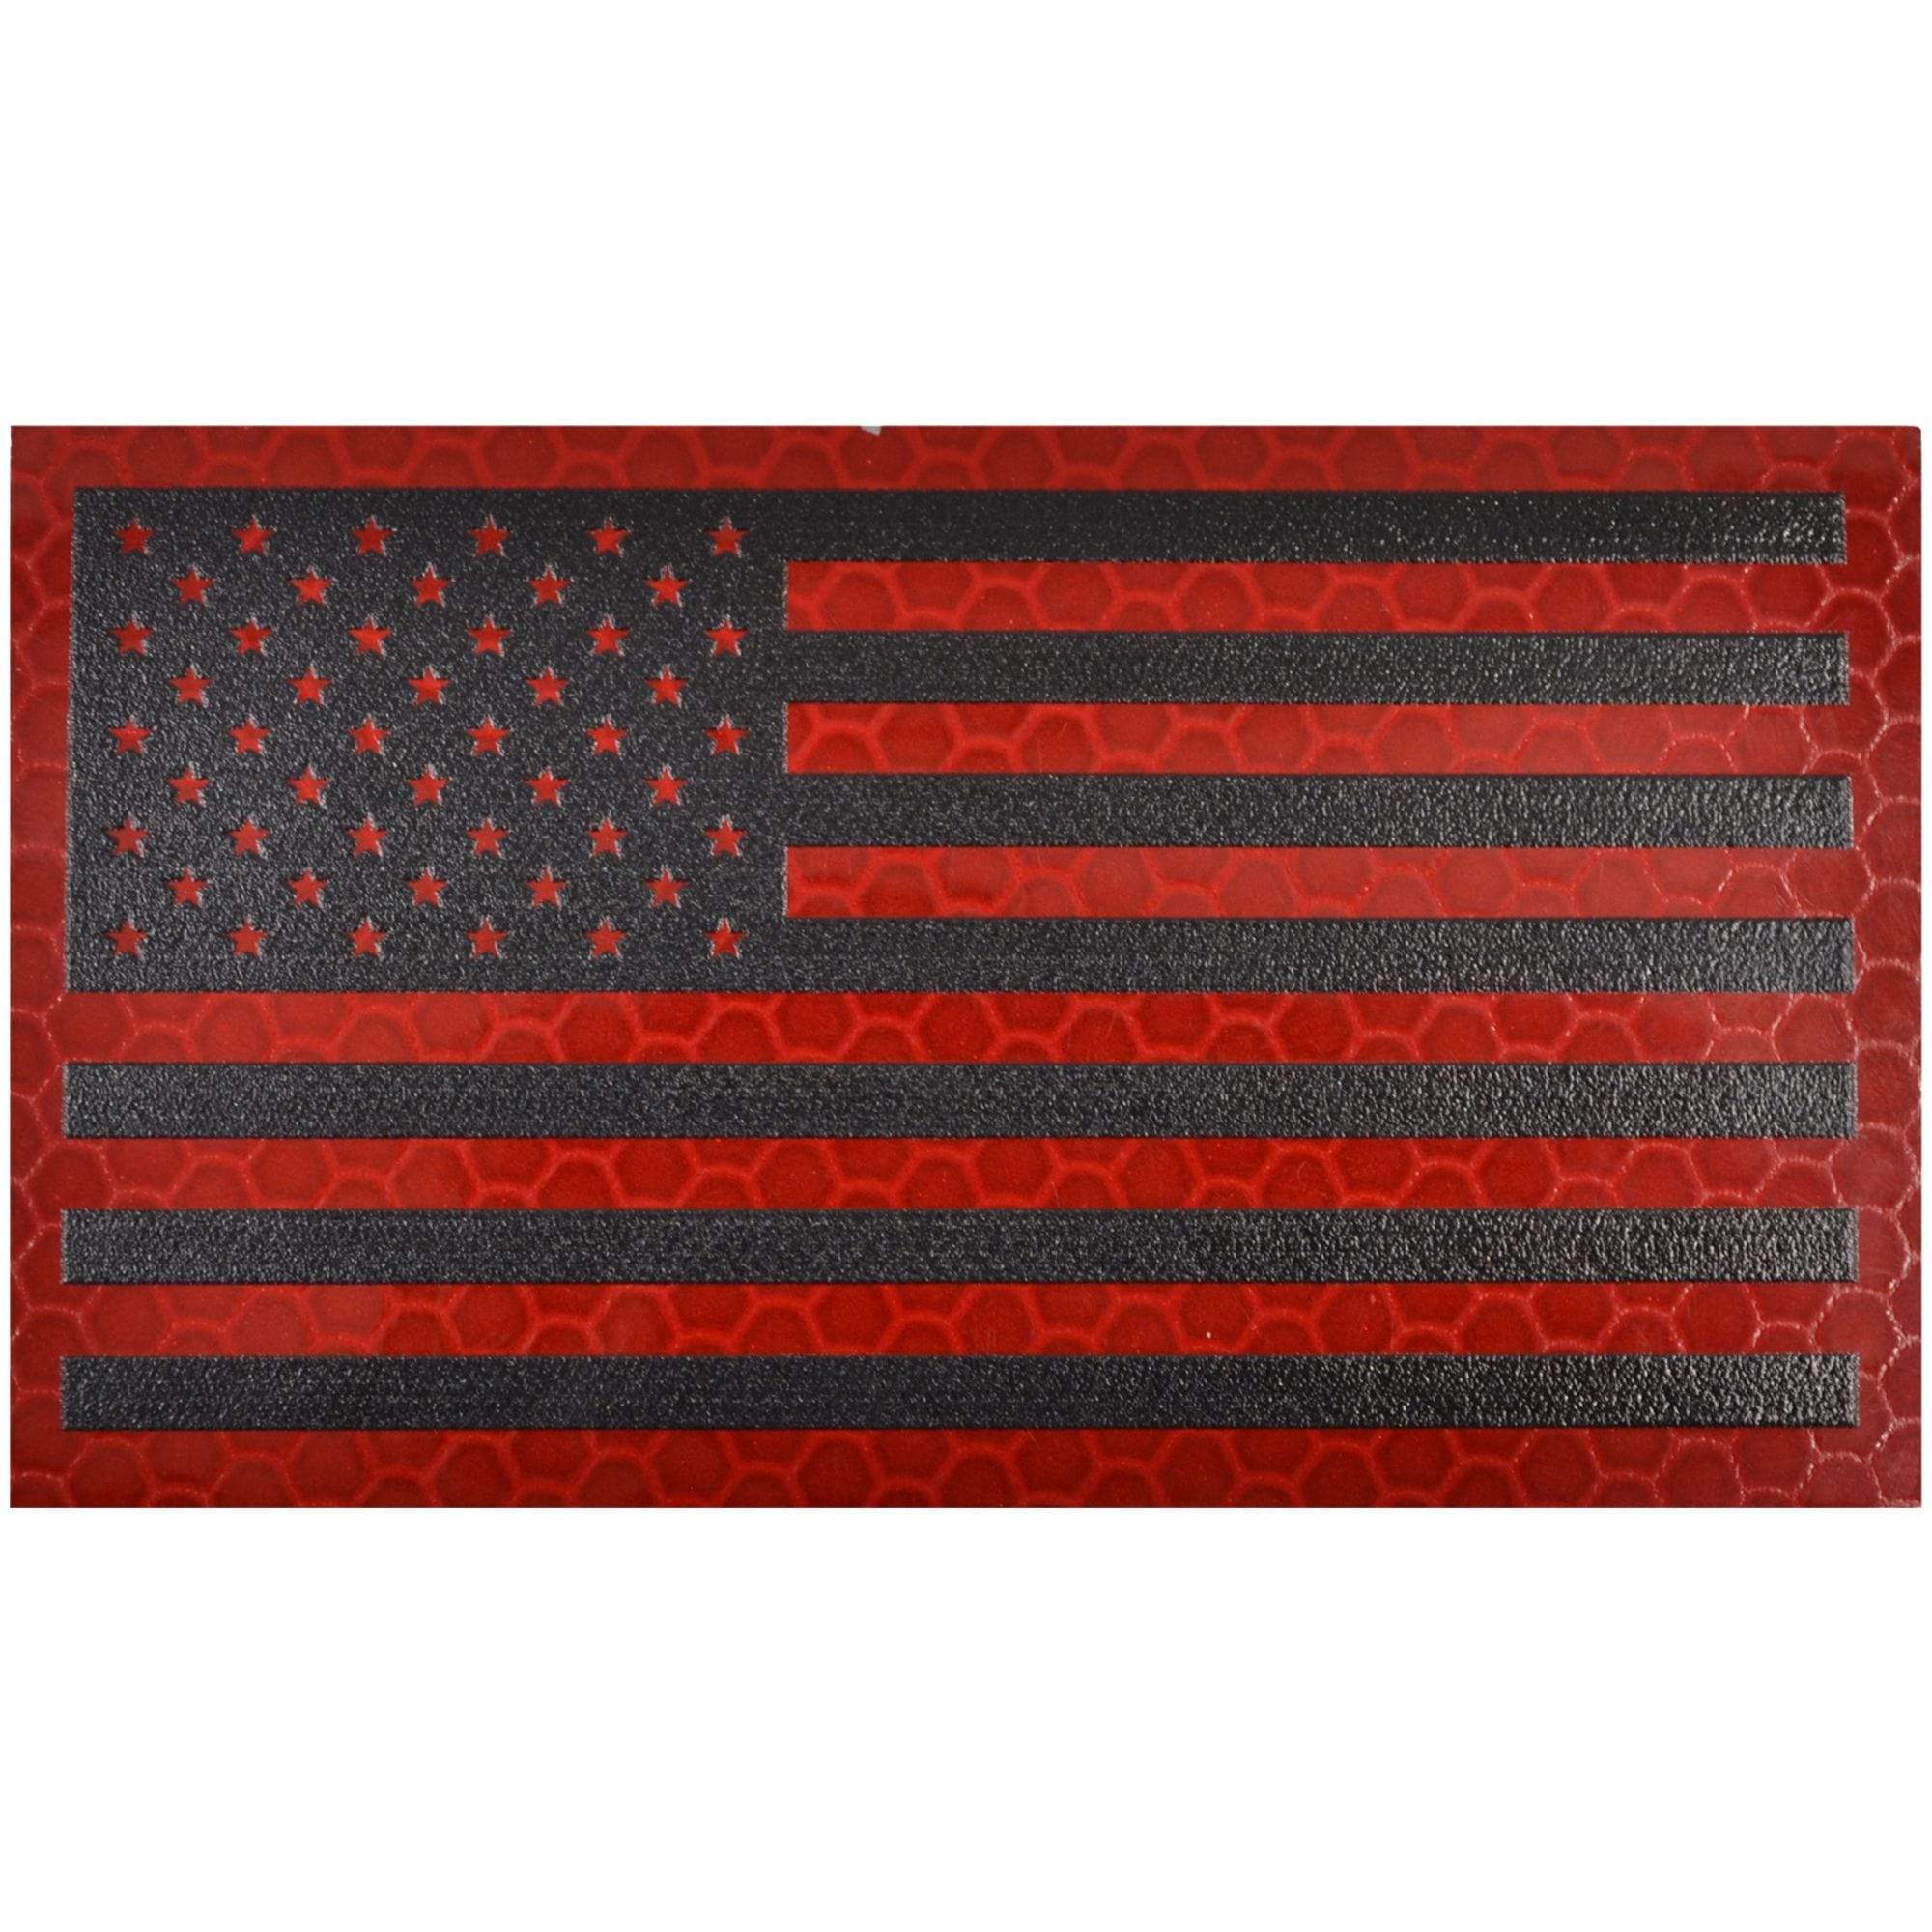 Tactical Gear Junkie Patches Forward Reflective Red/Black US Flag - 2x3.5 Patch